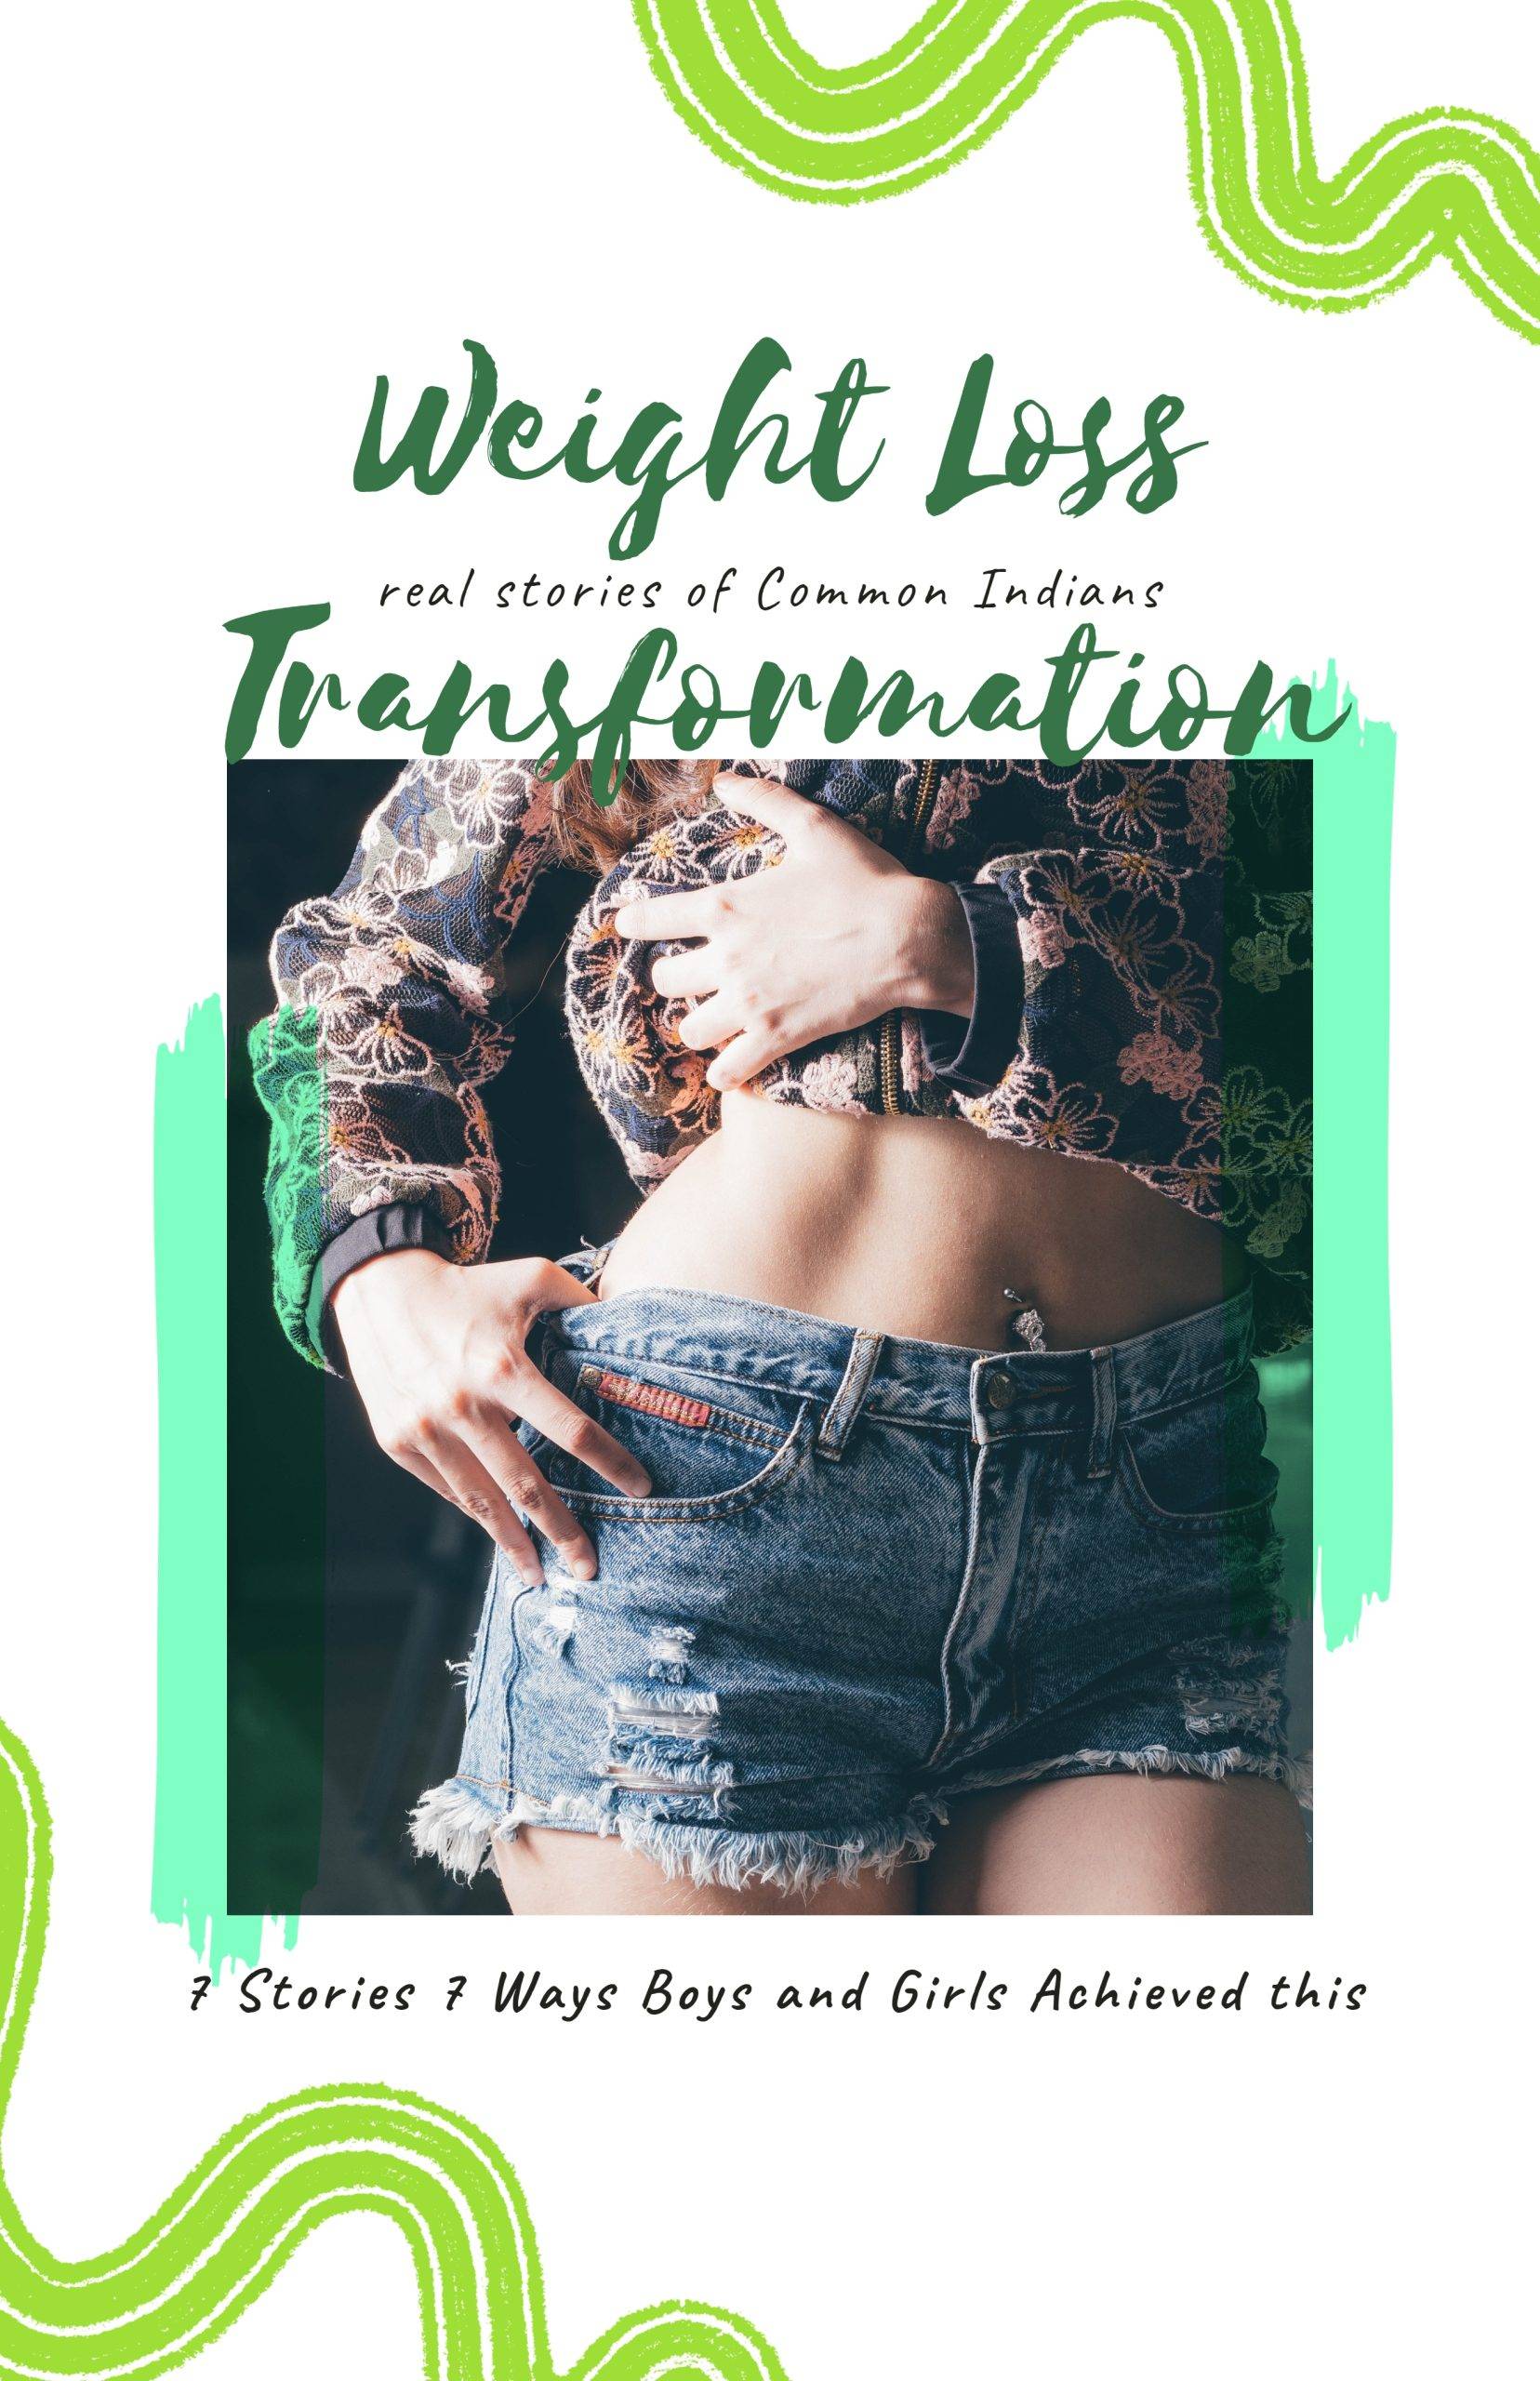 Weight Loss Transformation - Real Stories of 7 Common Indians